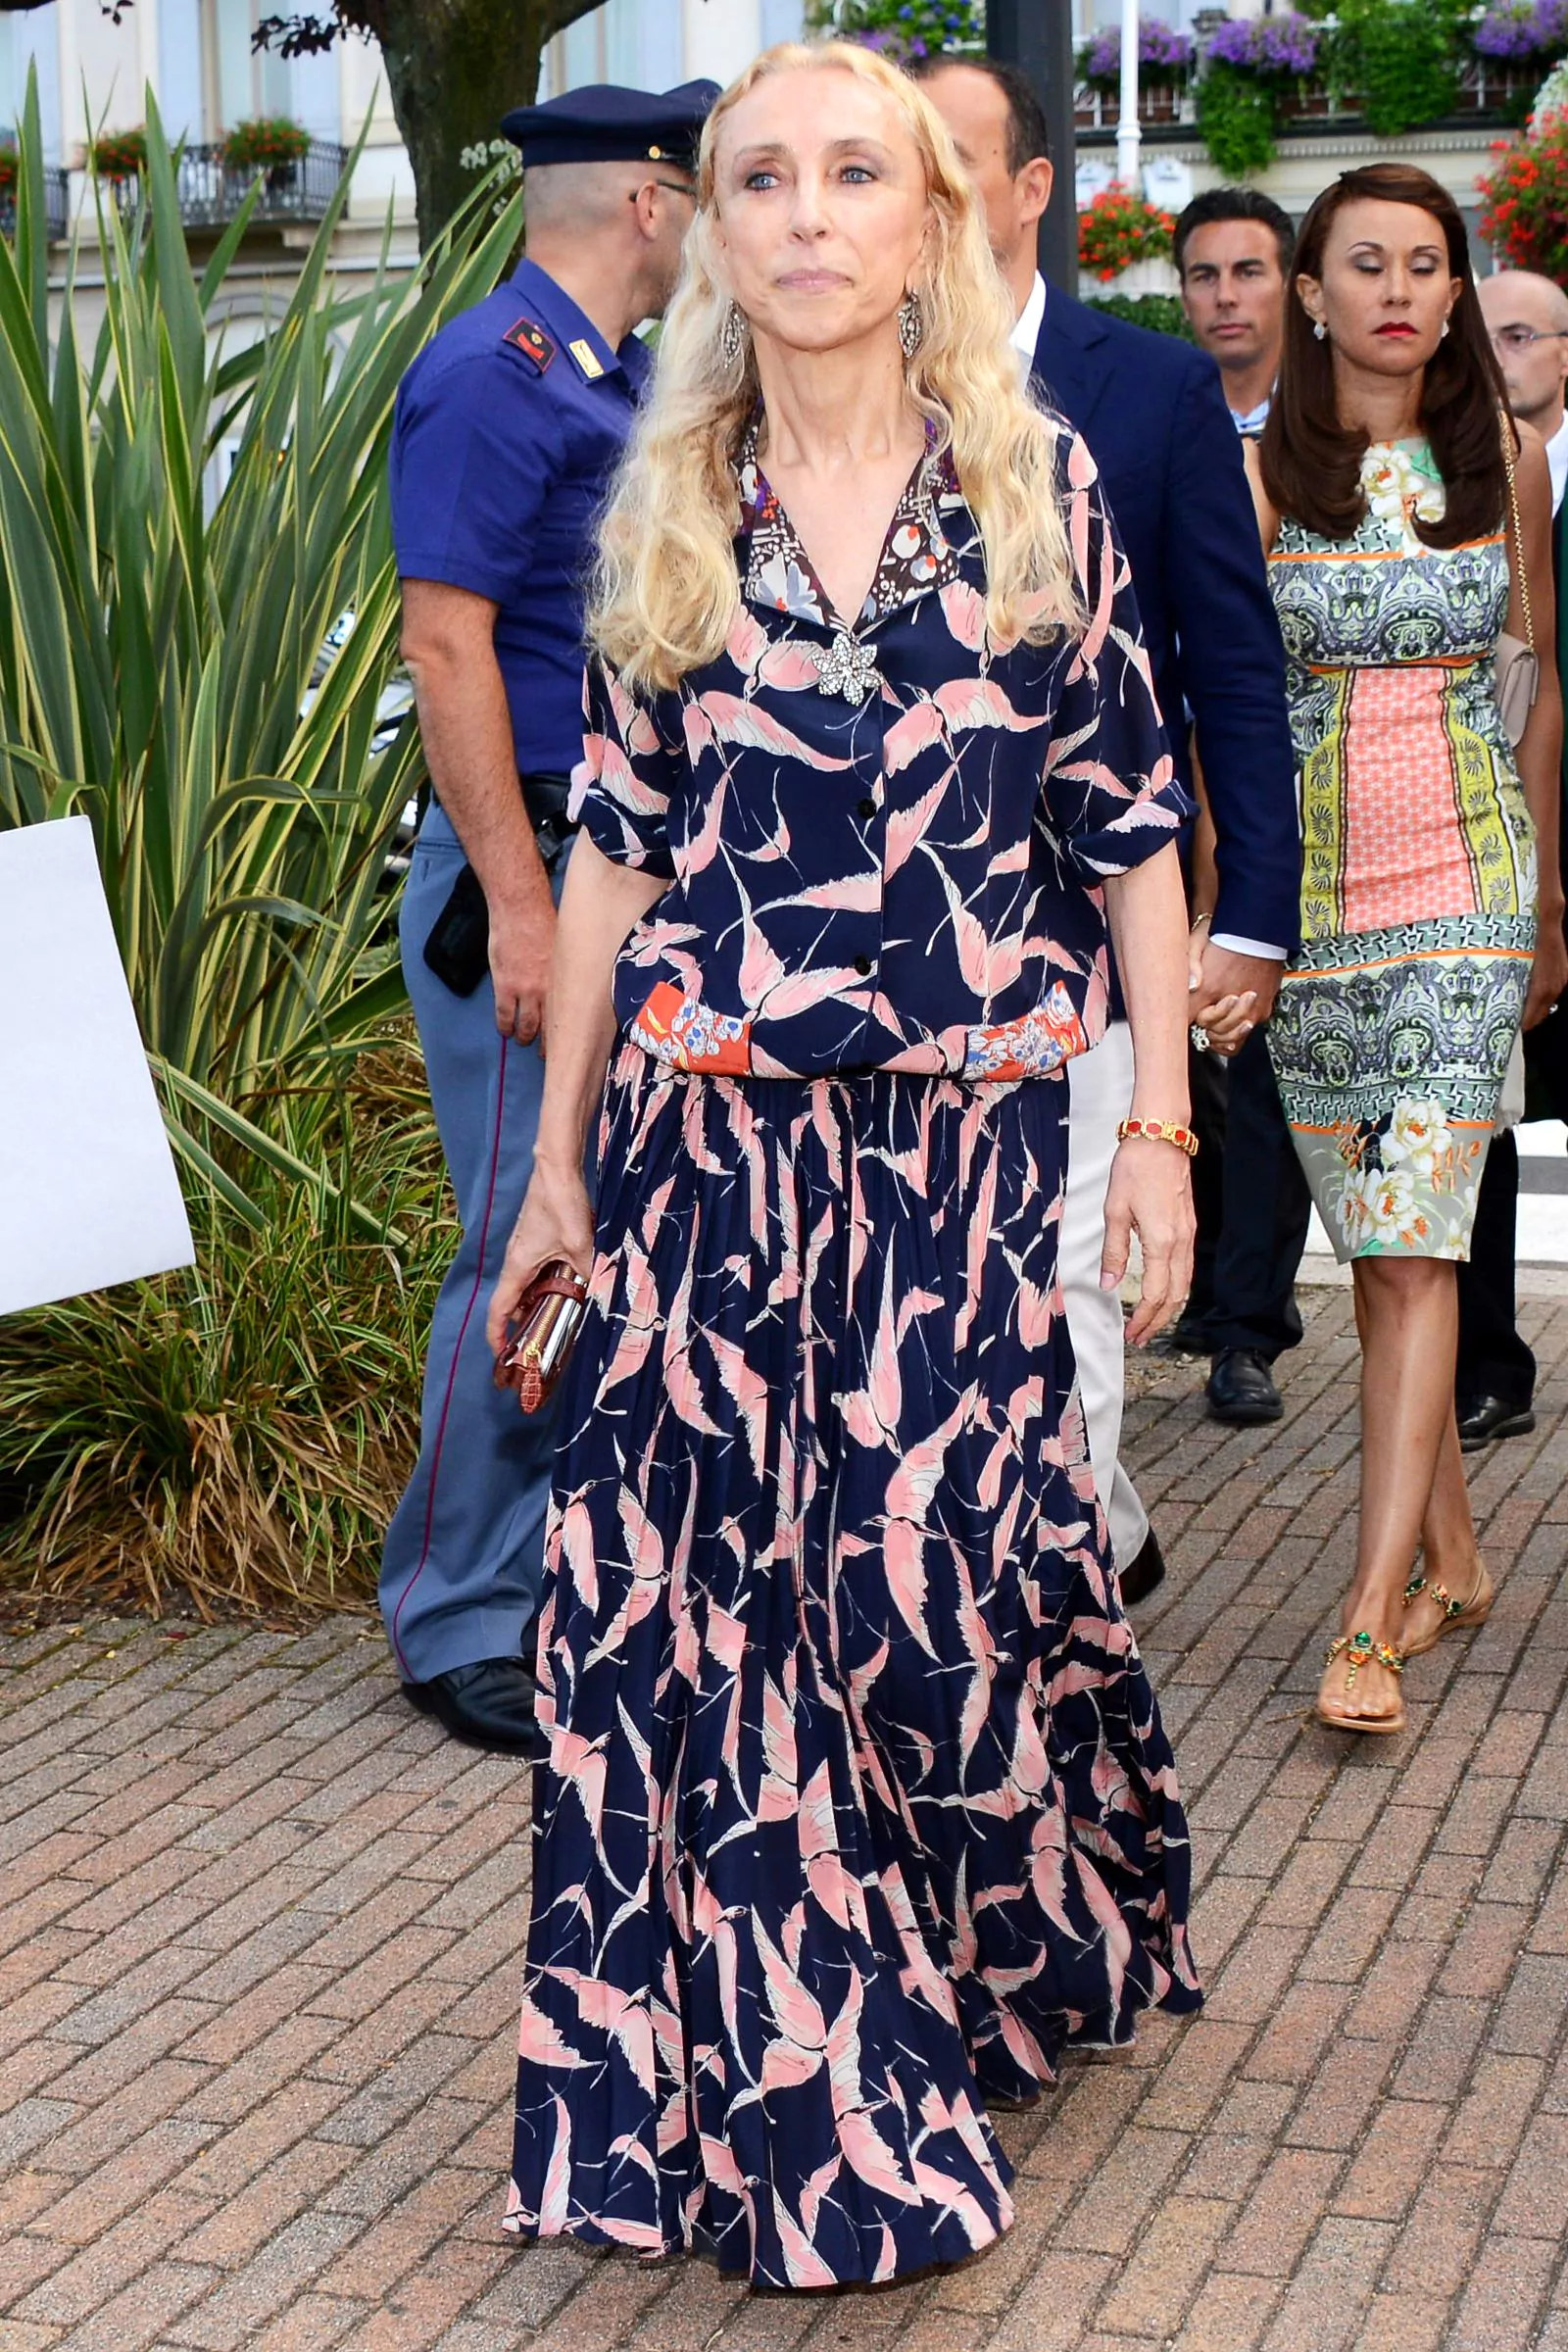 Franca Sozzani at the reception in honor of the wedding of Pierre Casiraghi and Beatrice Borromeo in Stresa, Italy, July 31, 2015.